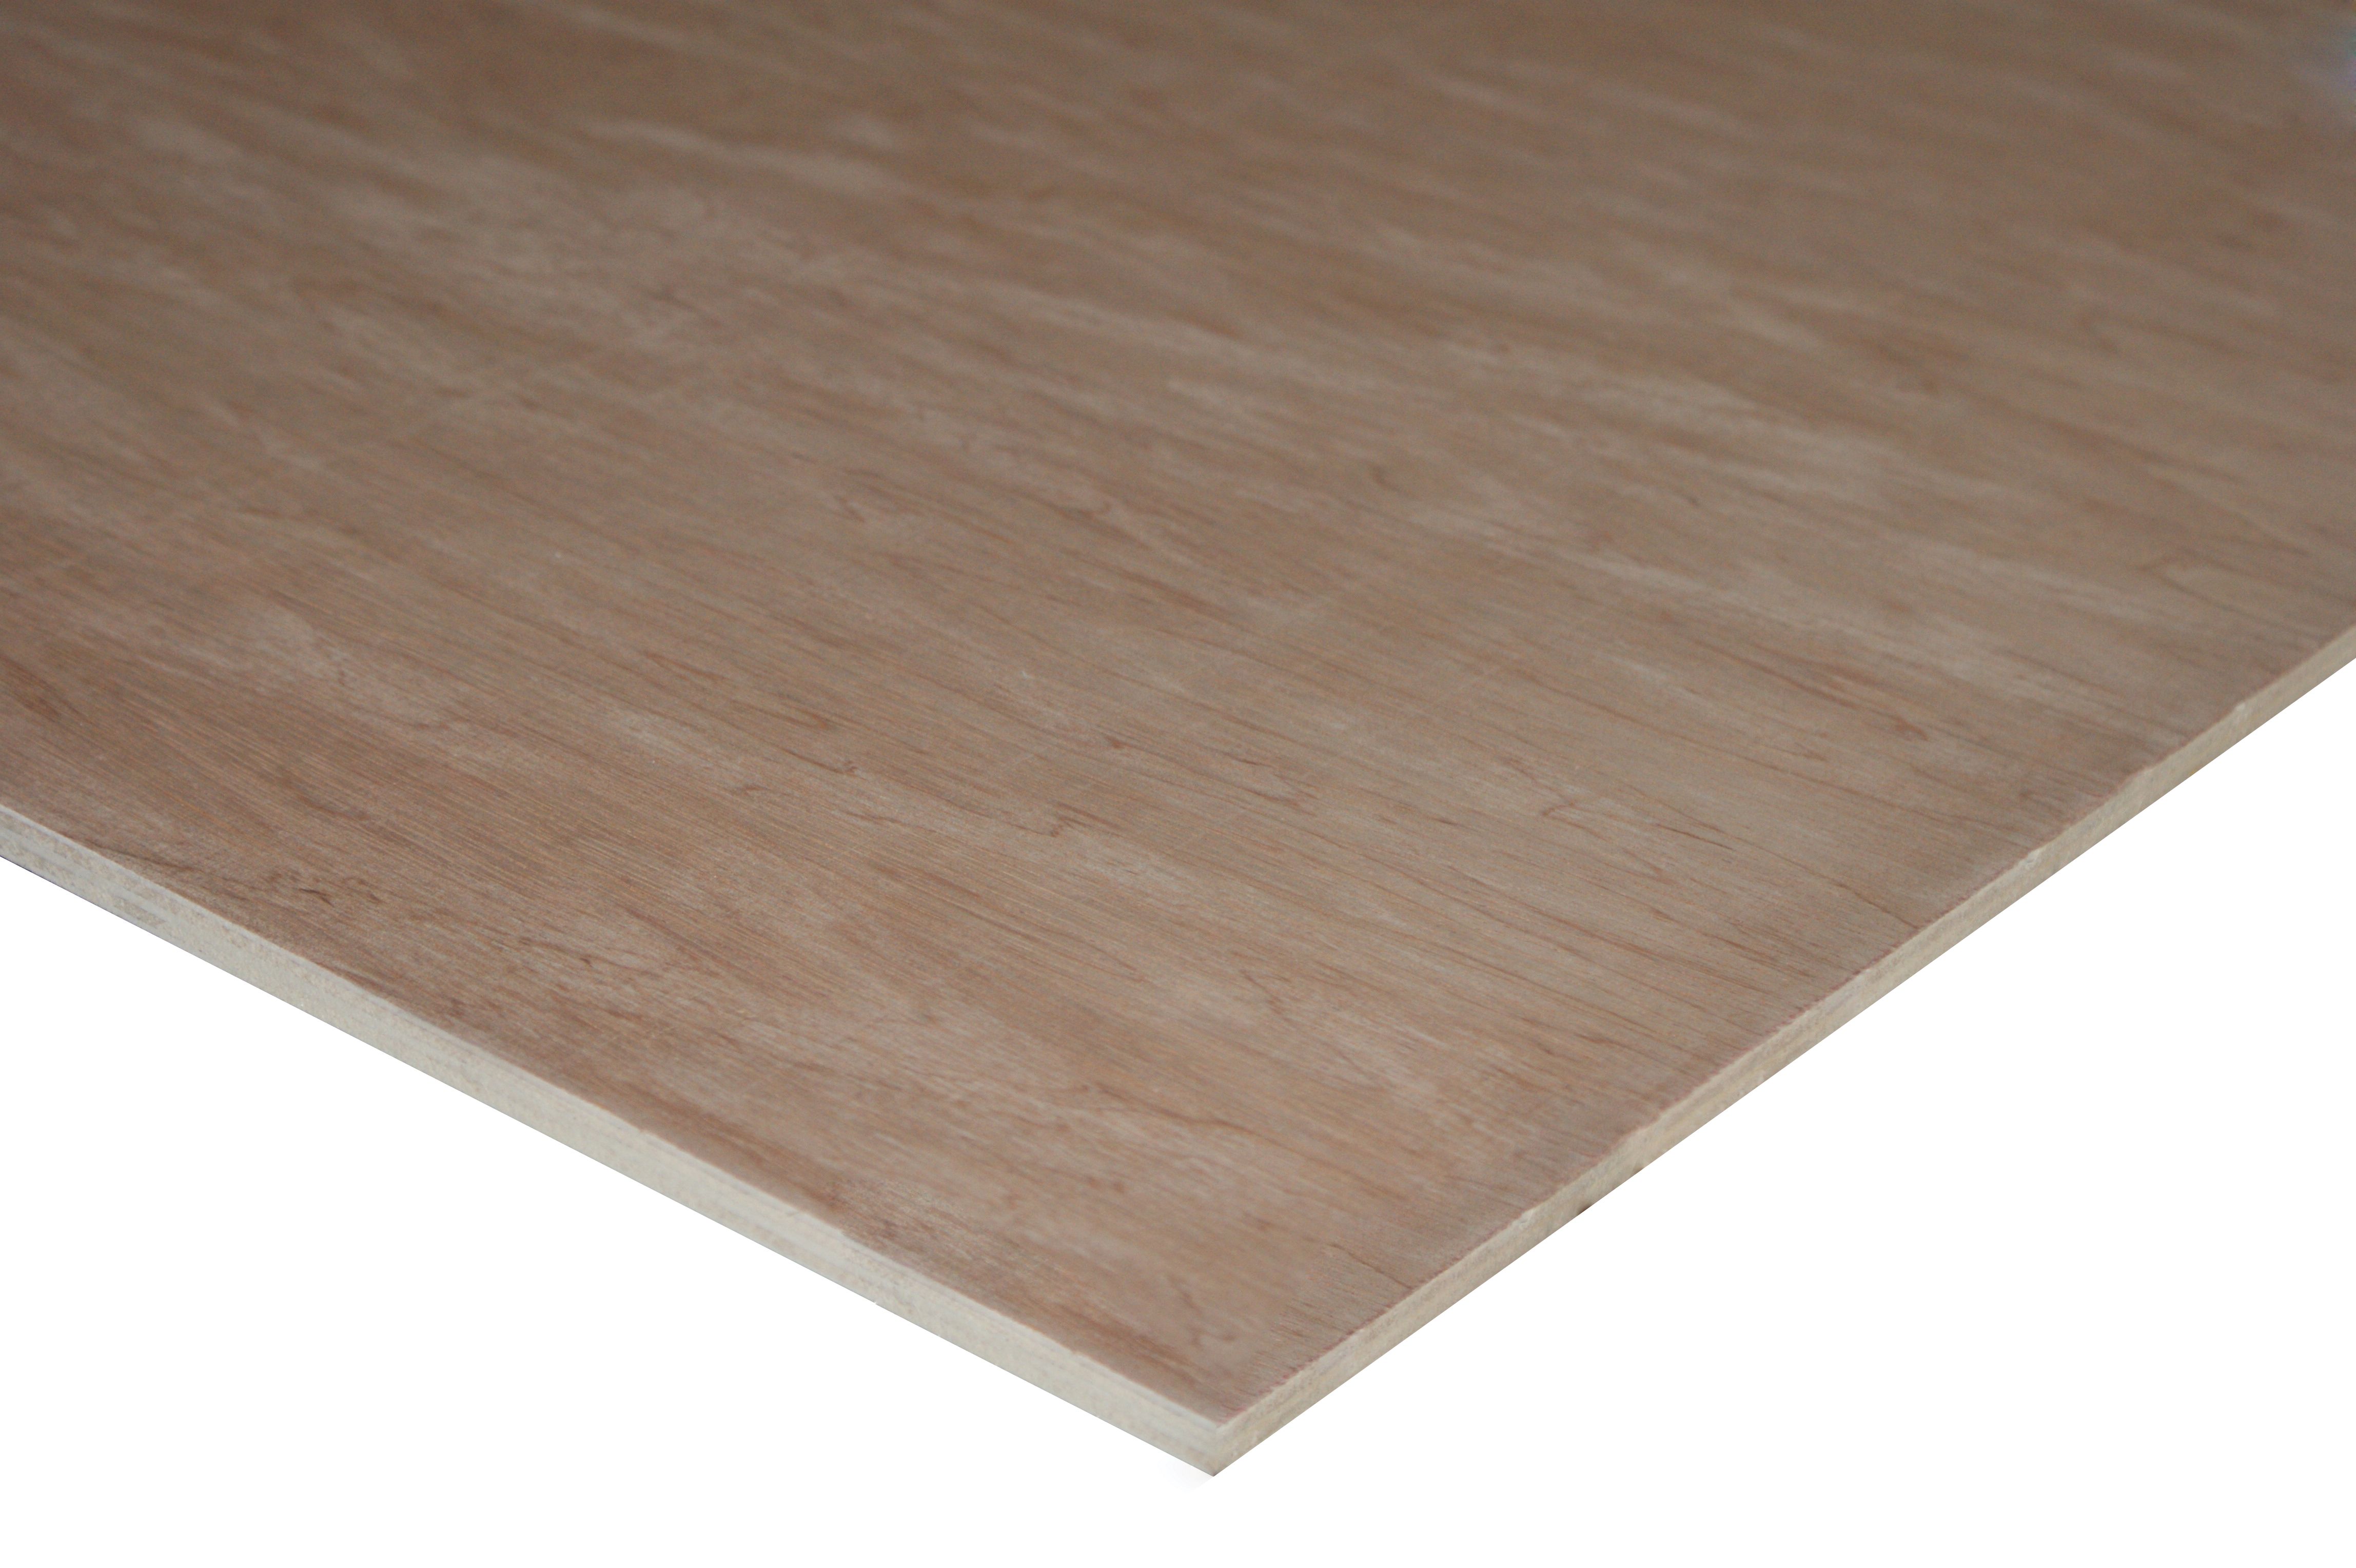 Non-Structural Hardwood Plywood Sheet - 18 x 606 x 1829mm